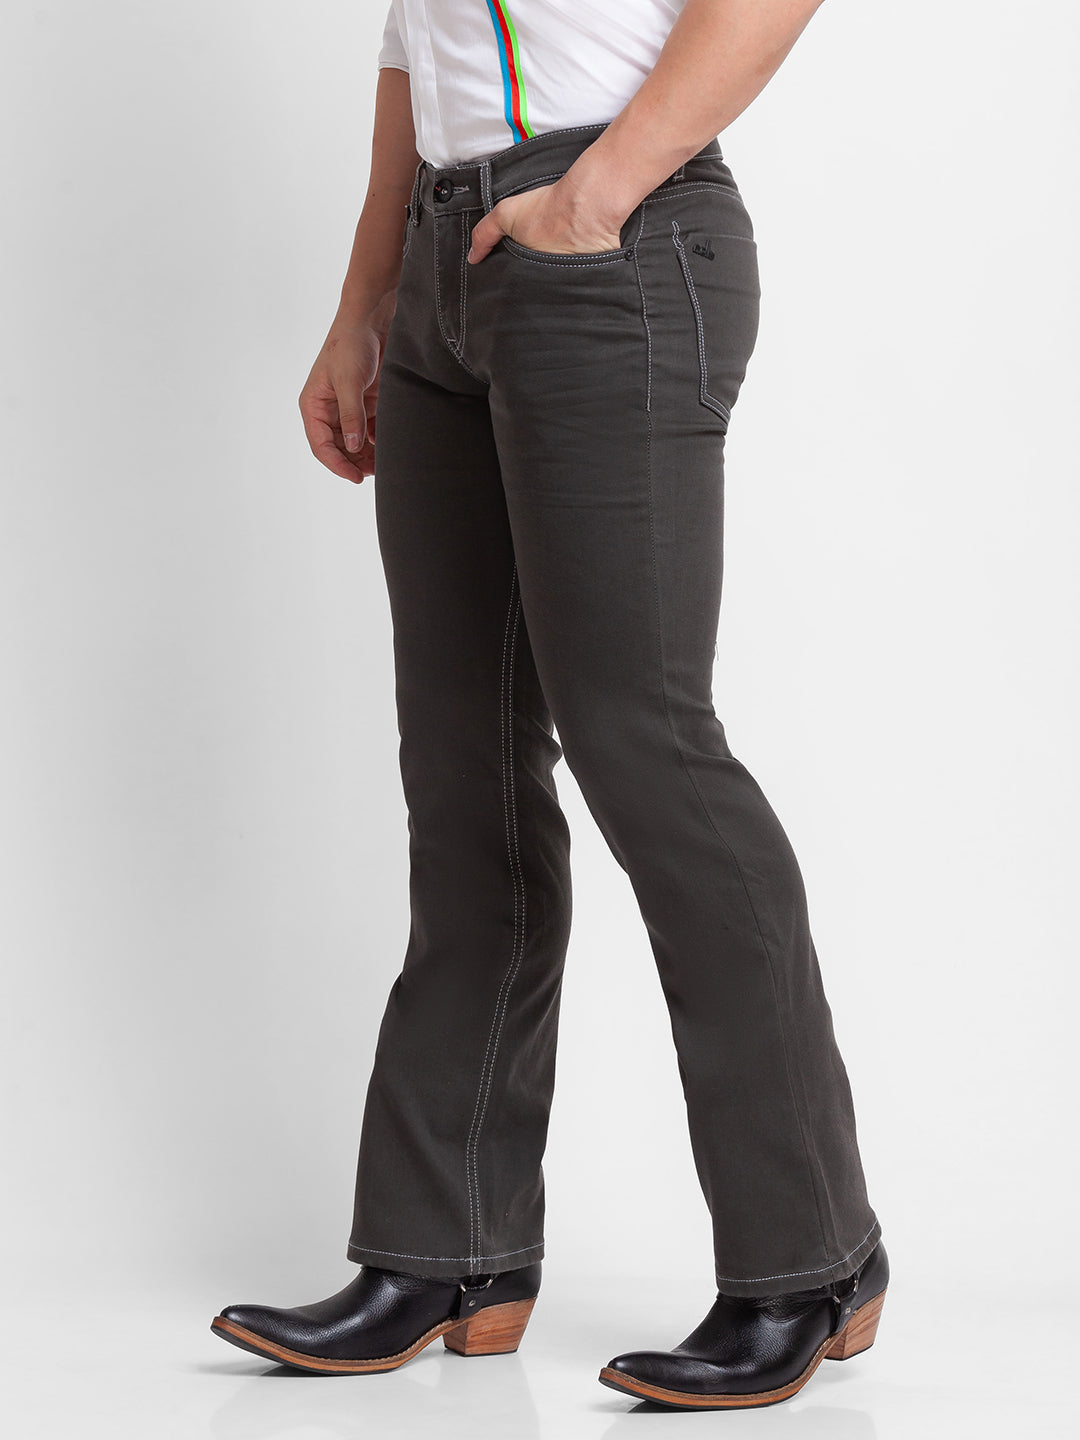 Charcoal Grey Bootcut Jeans for Men